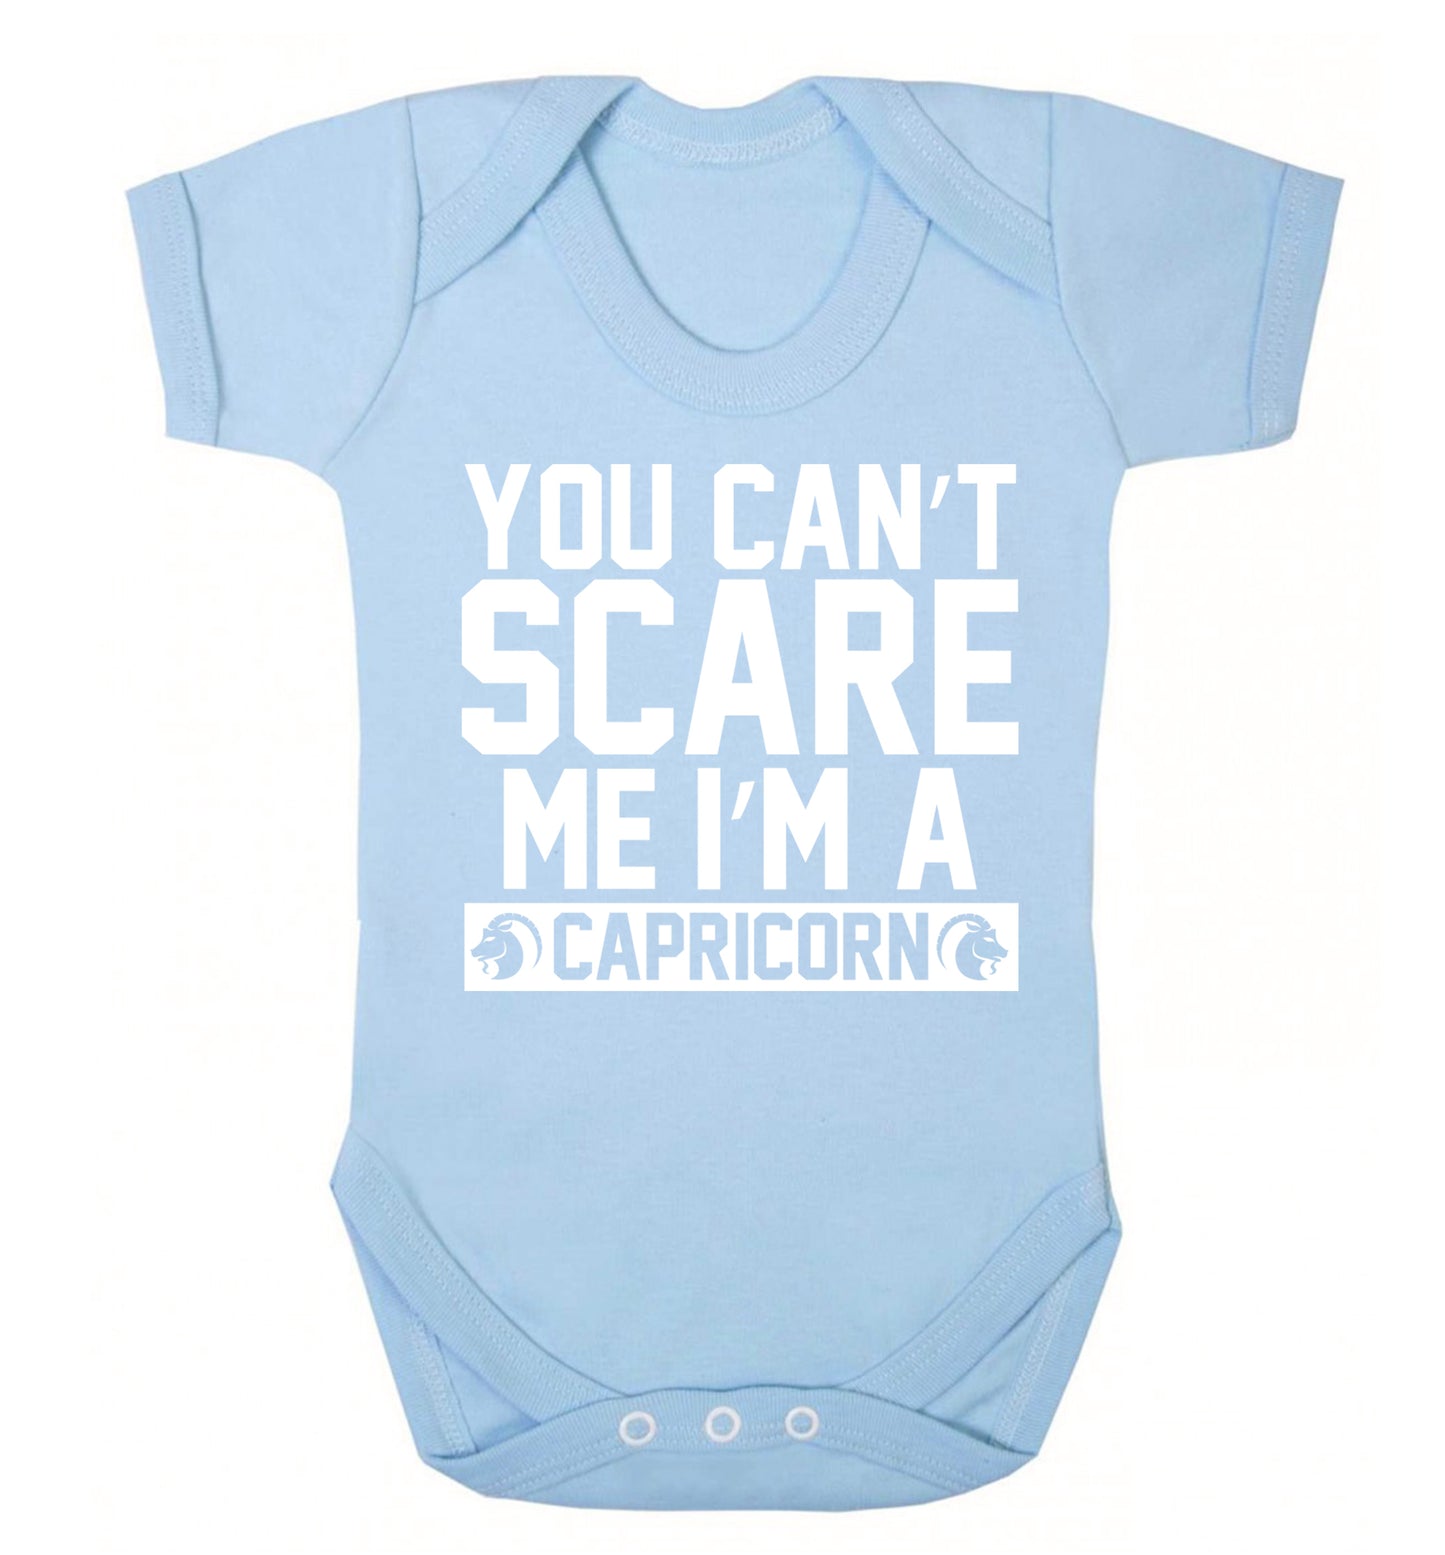 You can't scare me I'm a capricorn Baby Vest pale blue 18-24 months